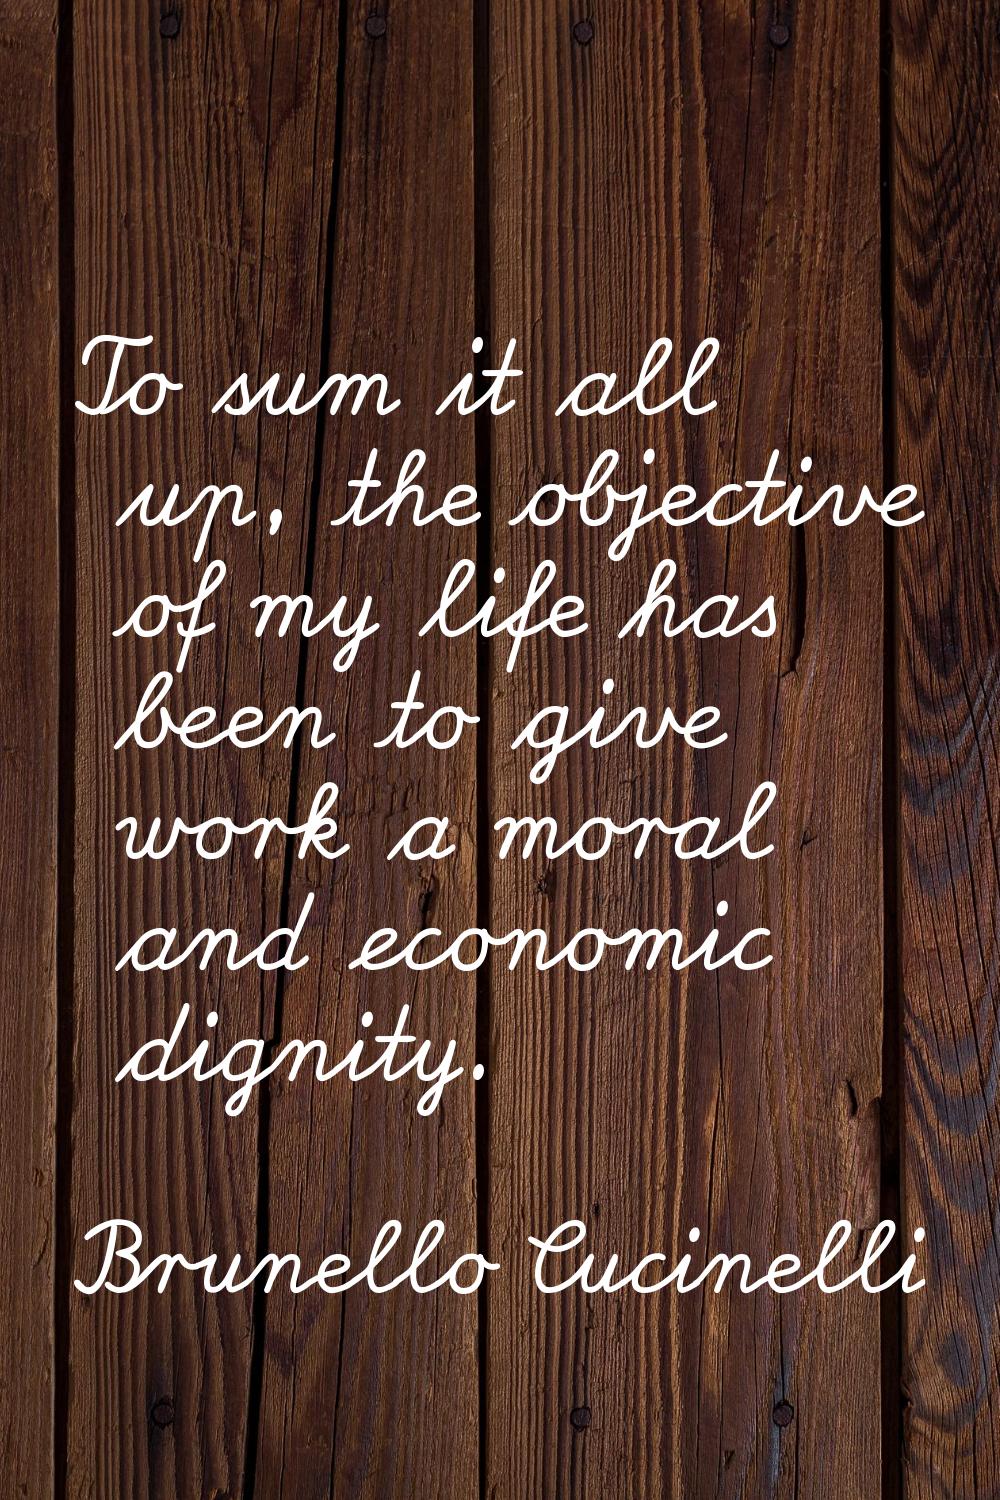 To sum it all up, the objective of my life has been to give work a moral and economic dignity.